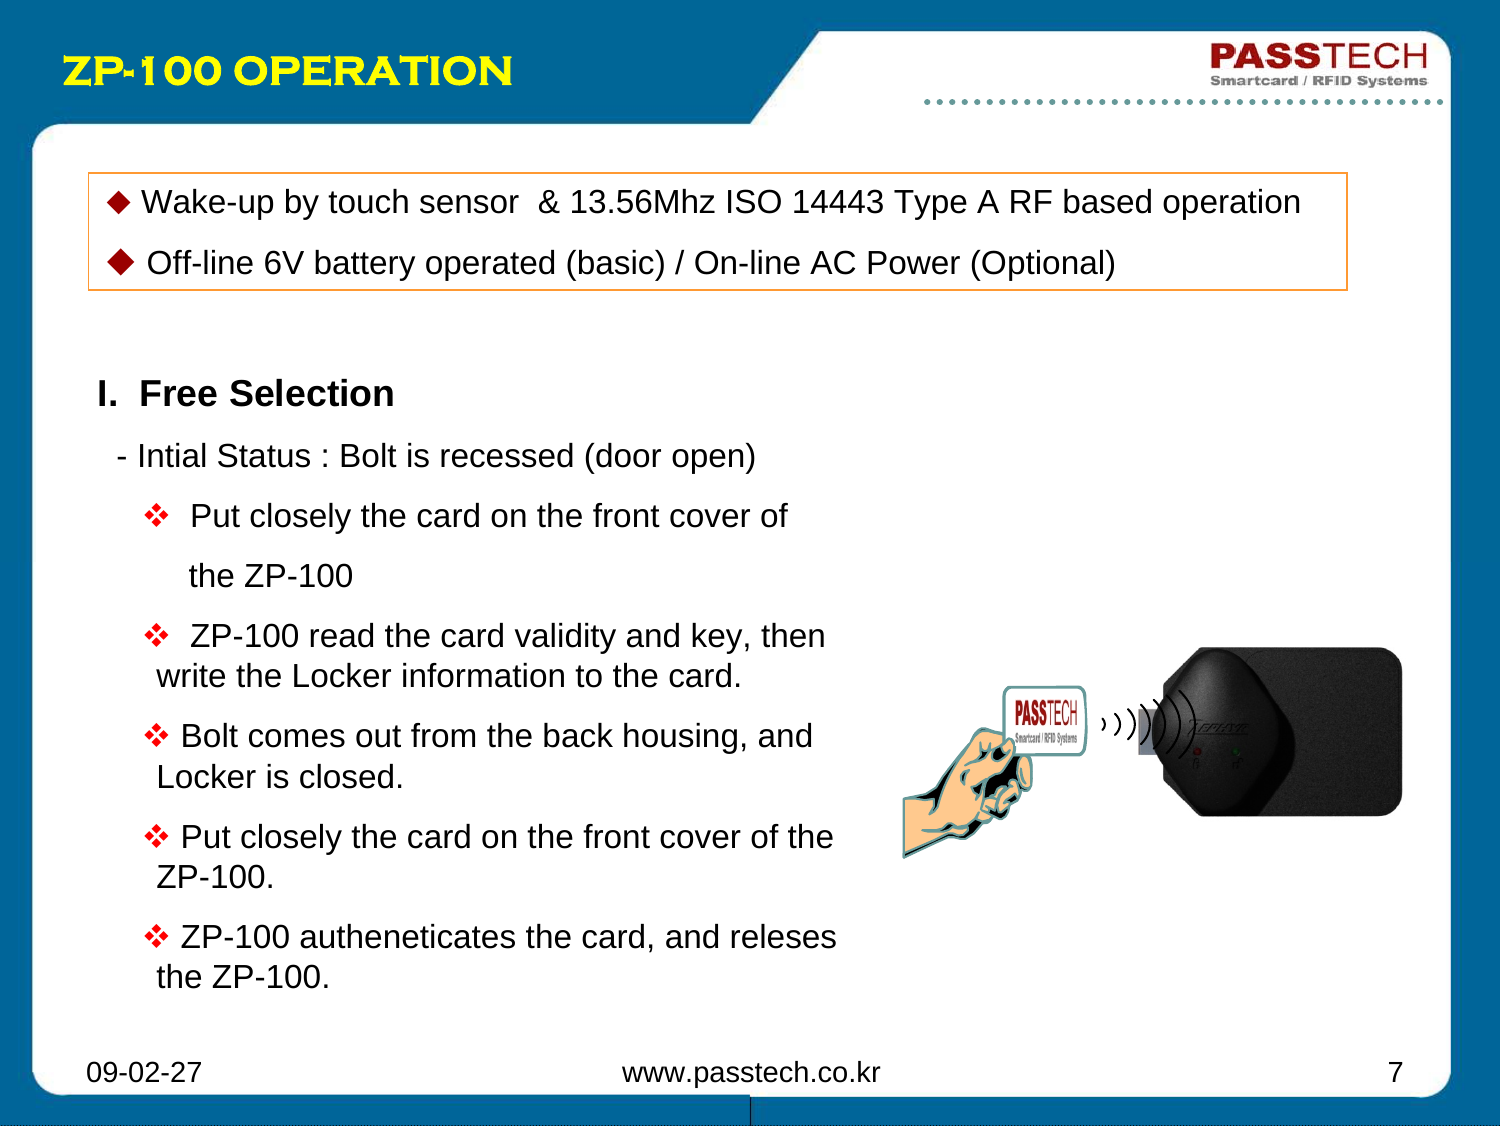 09-02-27 www.passtech.co.kr 7ZP-100 OPERATIONI.  Free Selection- Intial Status : Bolt is recessed (door open)Put closely the card on the front cover of  the ZP-100ZP-100 read the card validity and key, then write the Locker information to the card.Bolt comes out from the back housing, and Locker is closed.Put closely the card on the front cover of the ZP-100.ZP-100 autheneticates the card, and relesesthe ZP-100.Wake-up by touch sensor  &amp; 13.56Mhz ISO 14443 Type A RF based operationOff-line 6V battery operated (basic) / On-line AC Power (Optional)